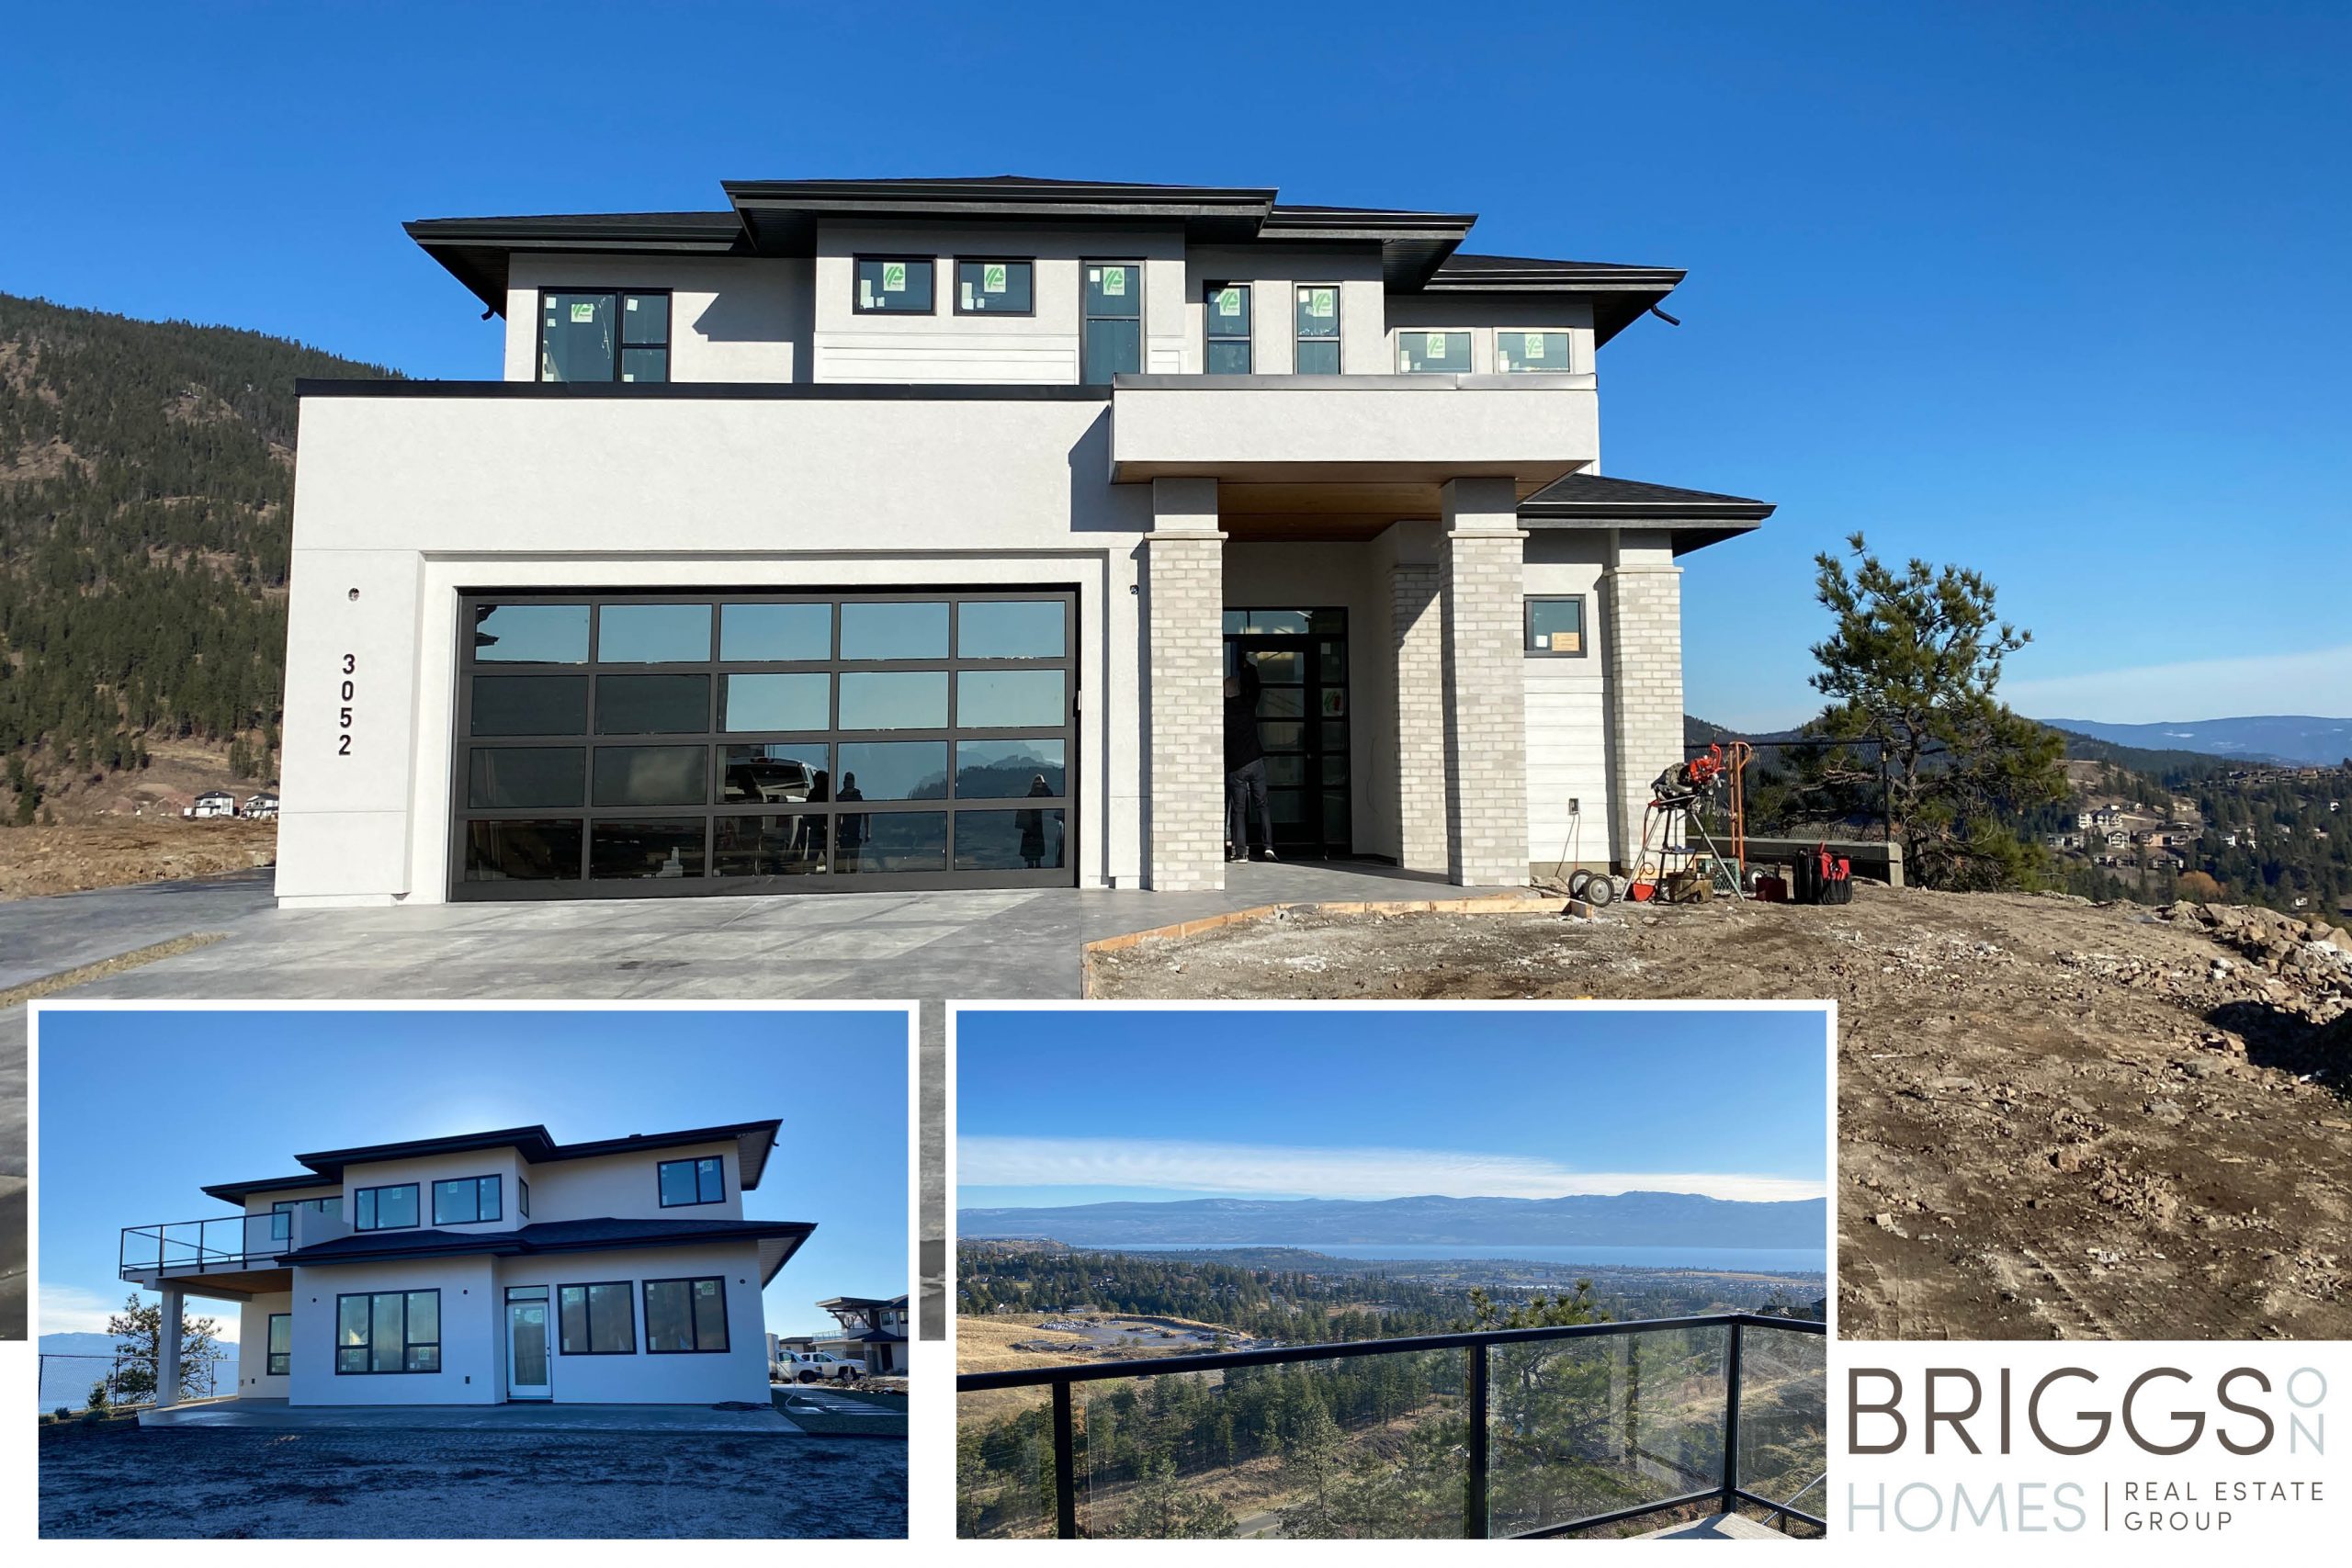 Just SOLD! Stunning new home at the Views!